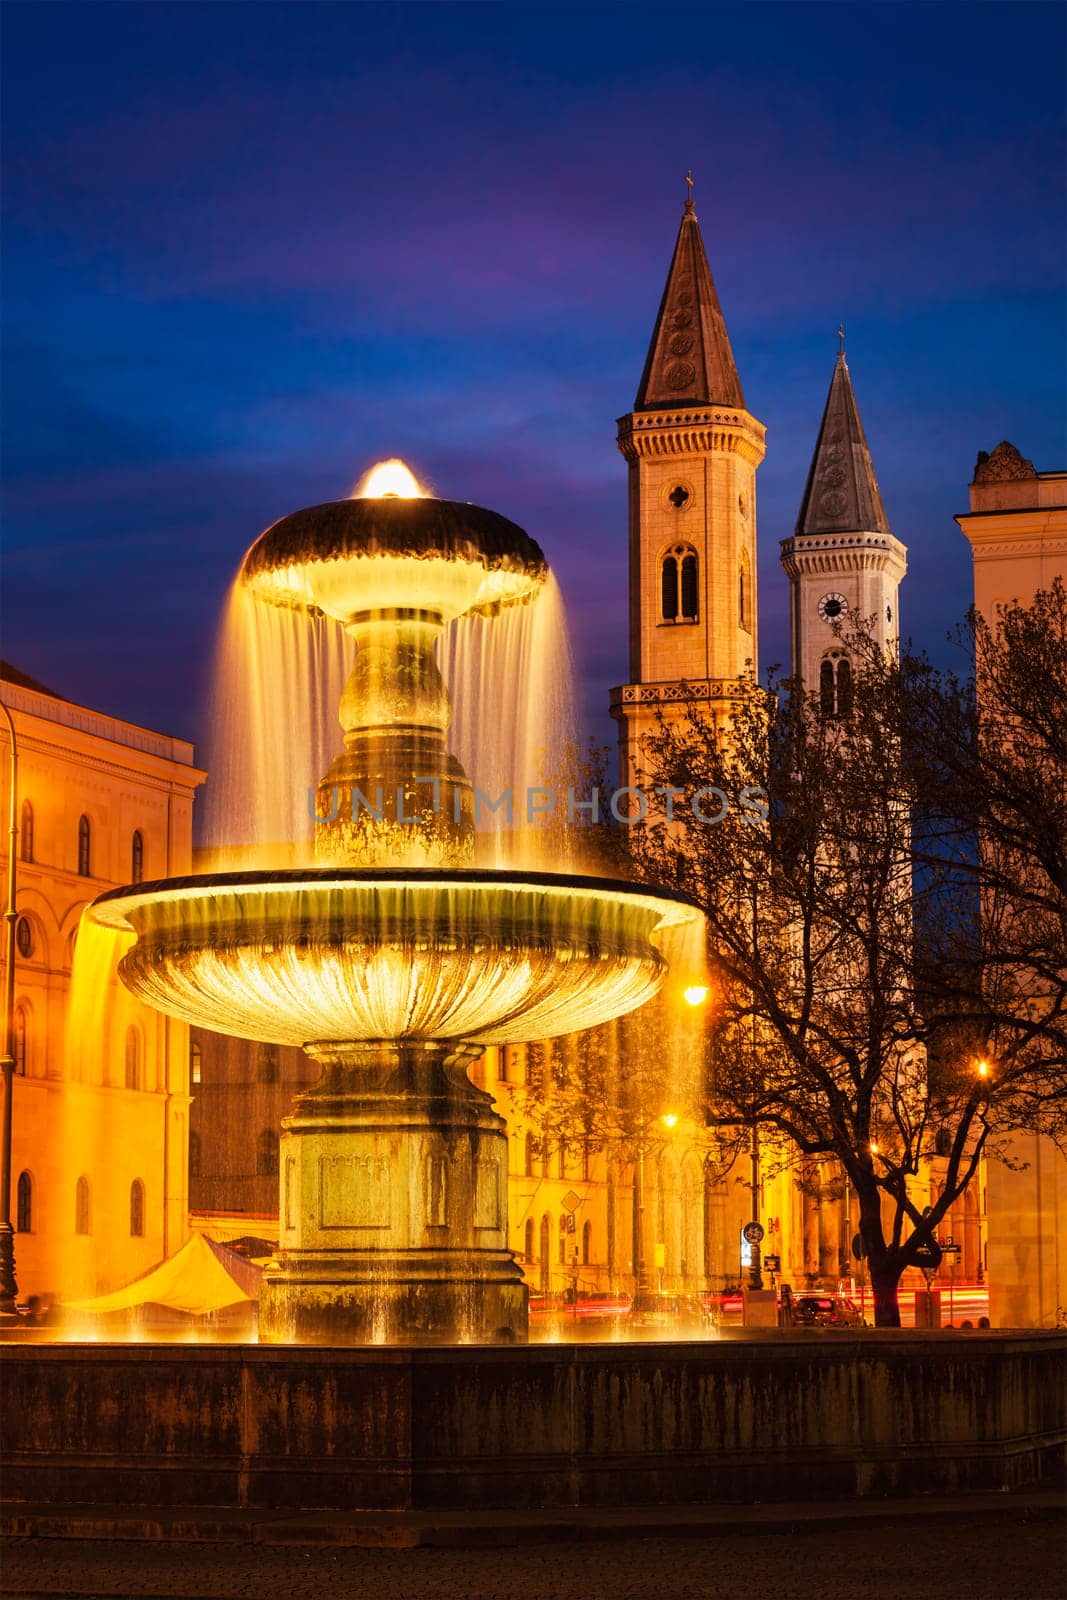 Fountain in the Geschwister-Scholl-Platz and St. Ludwig's Church by dimol